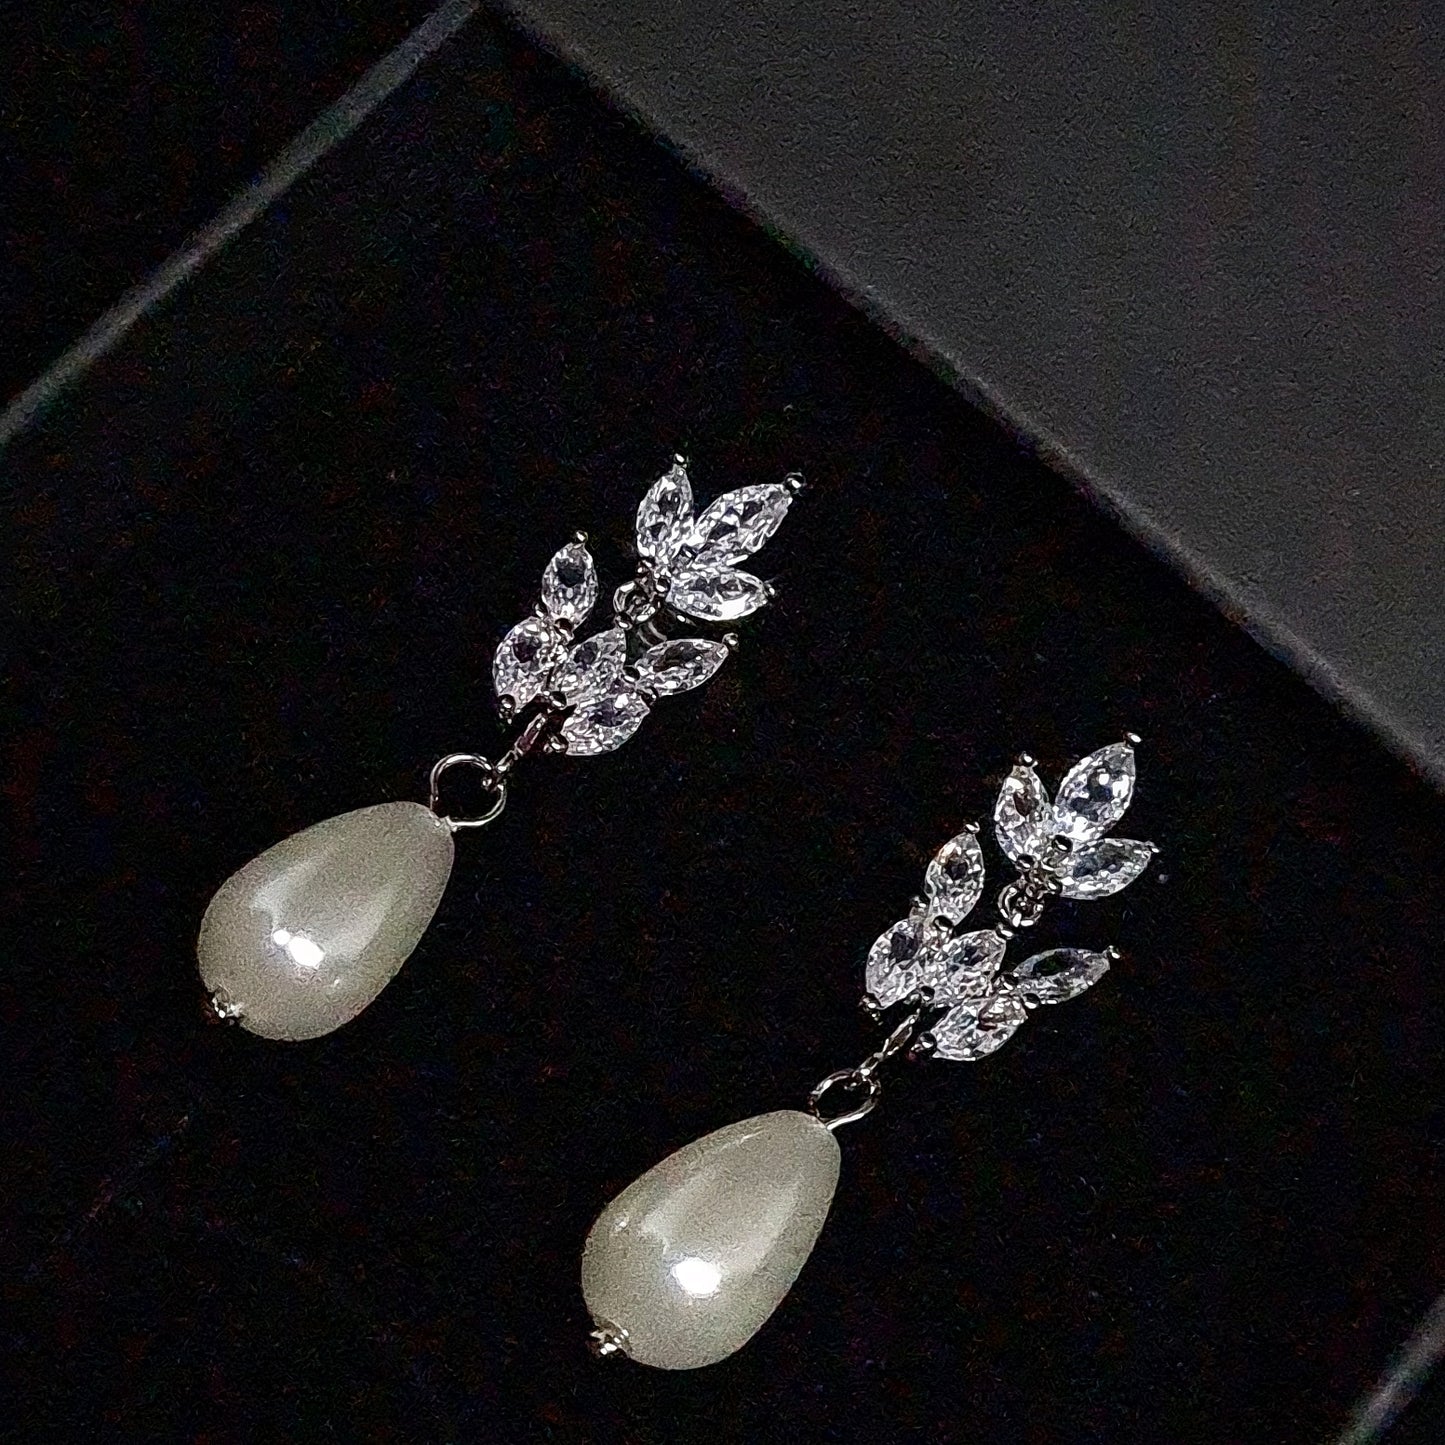 A pair of earrings made of pearl and rhinestones on a black box. The earrings are decorated with a pearl and rhinestones. The earrings are perfect for a special occasion or for everyday wear